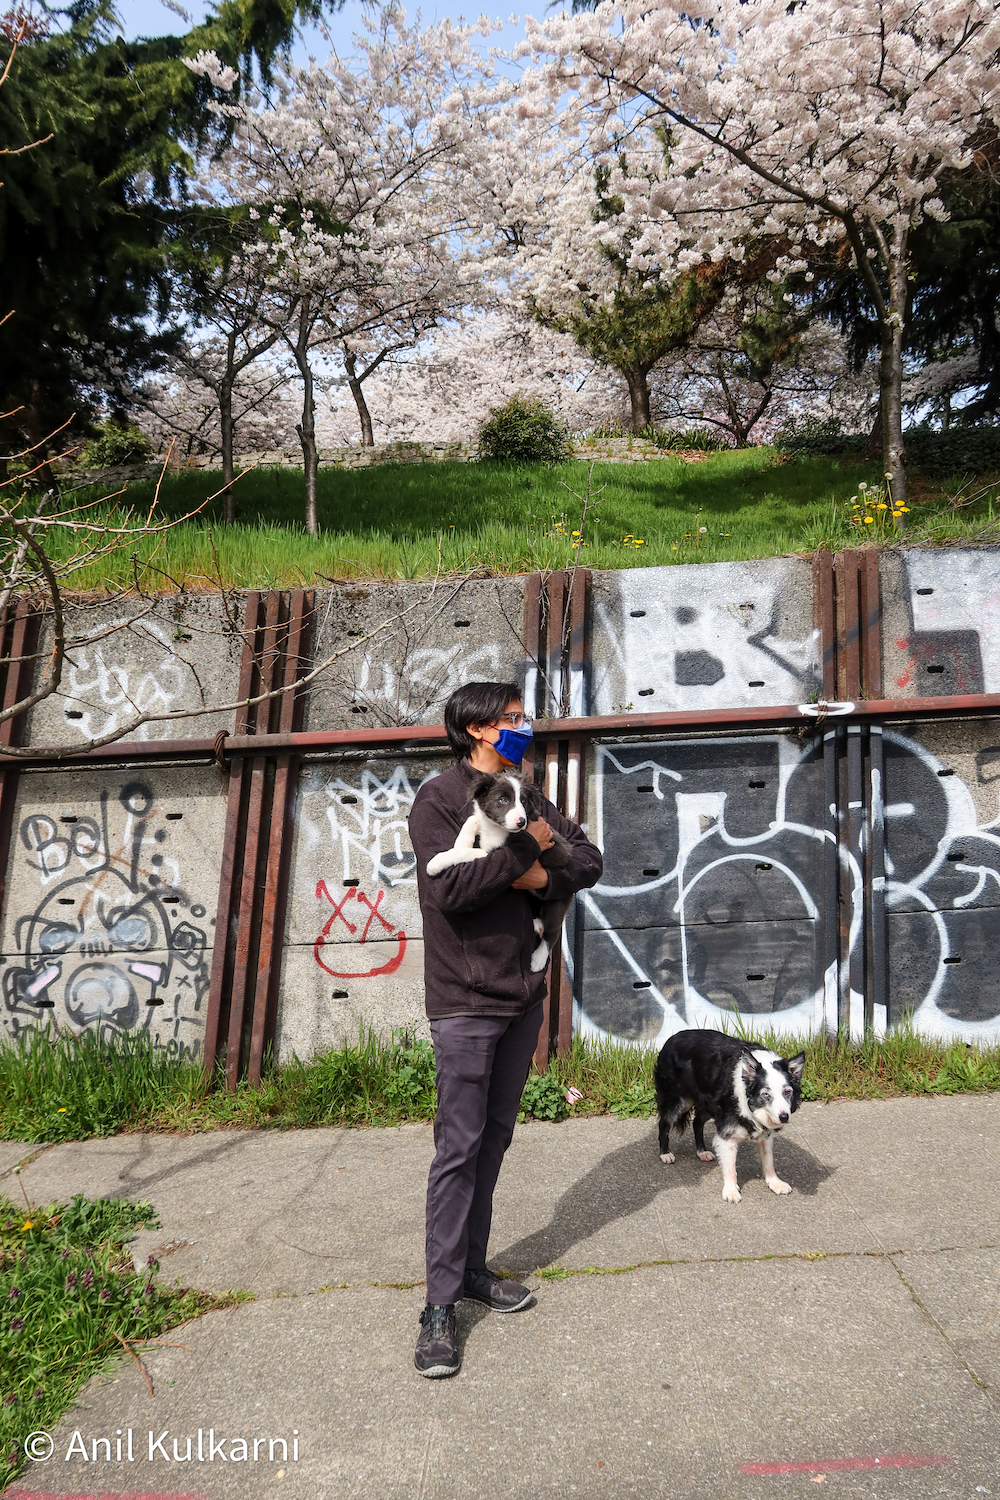 Person and a dog in front of a graffiti wall